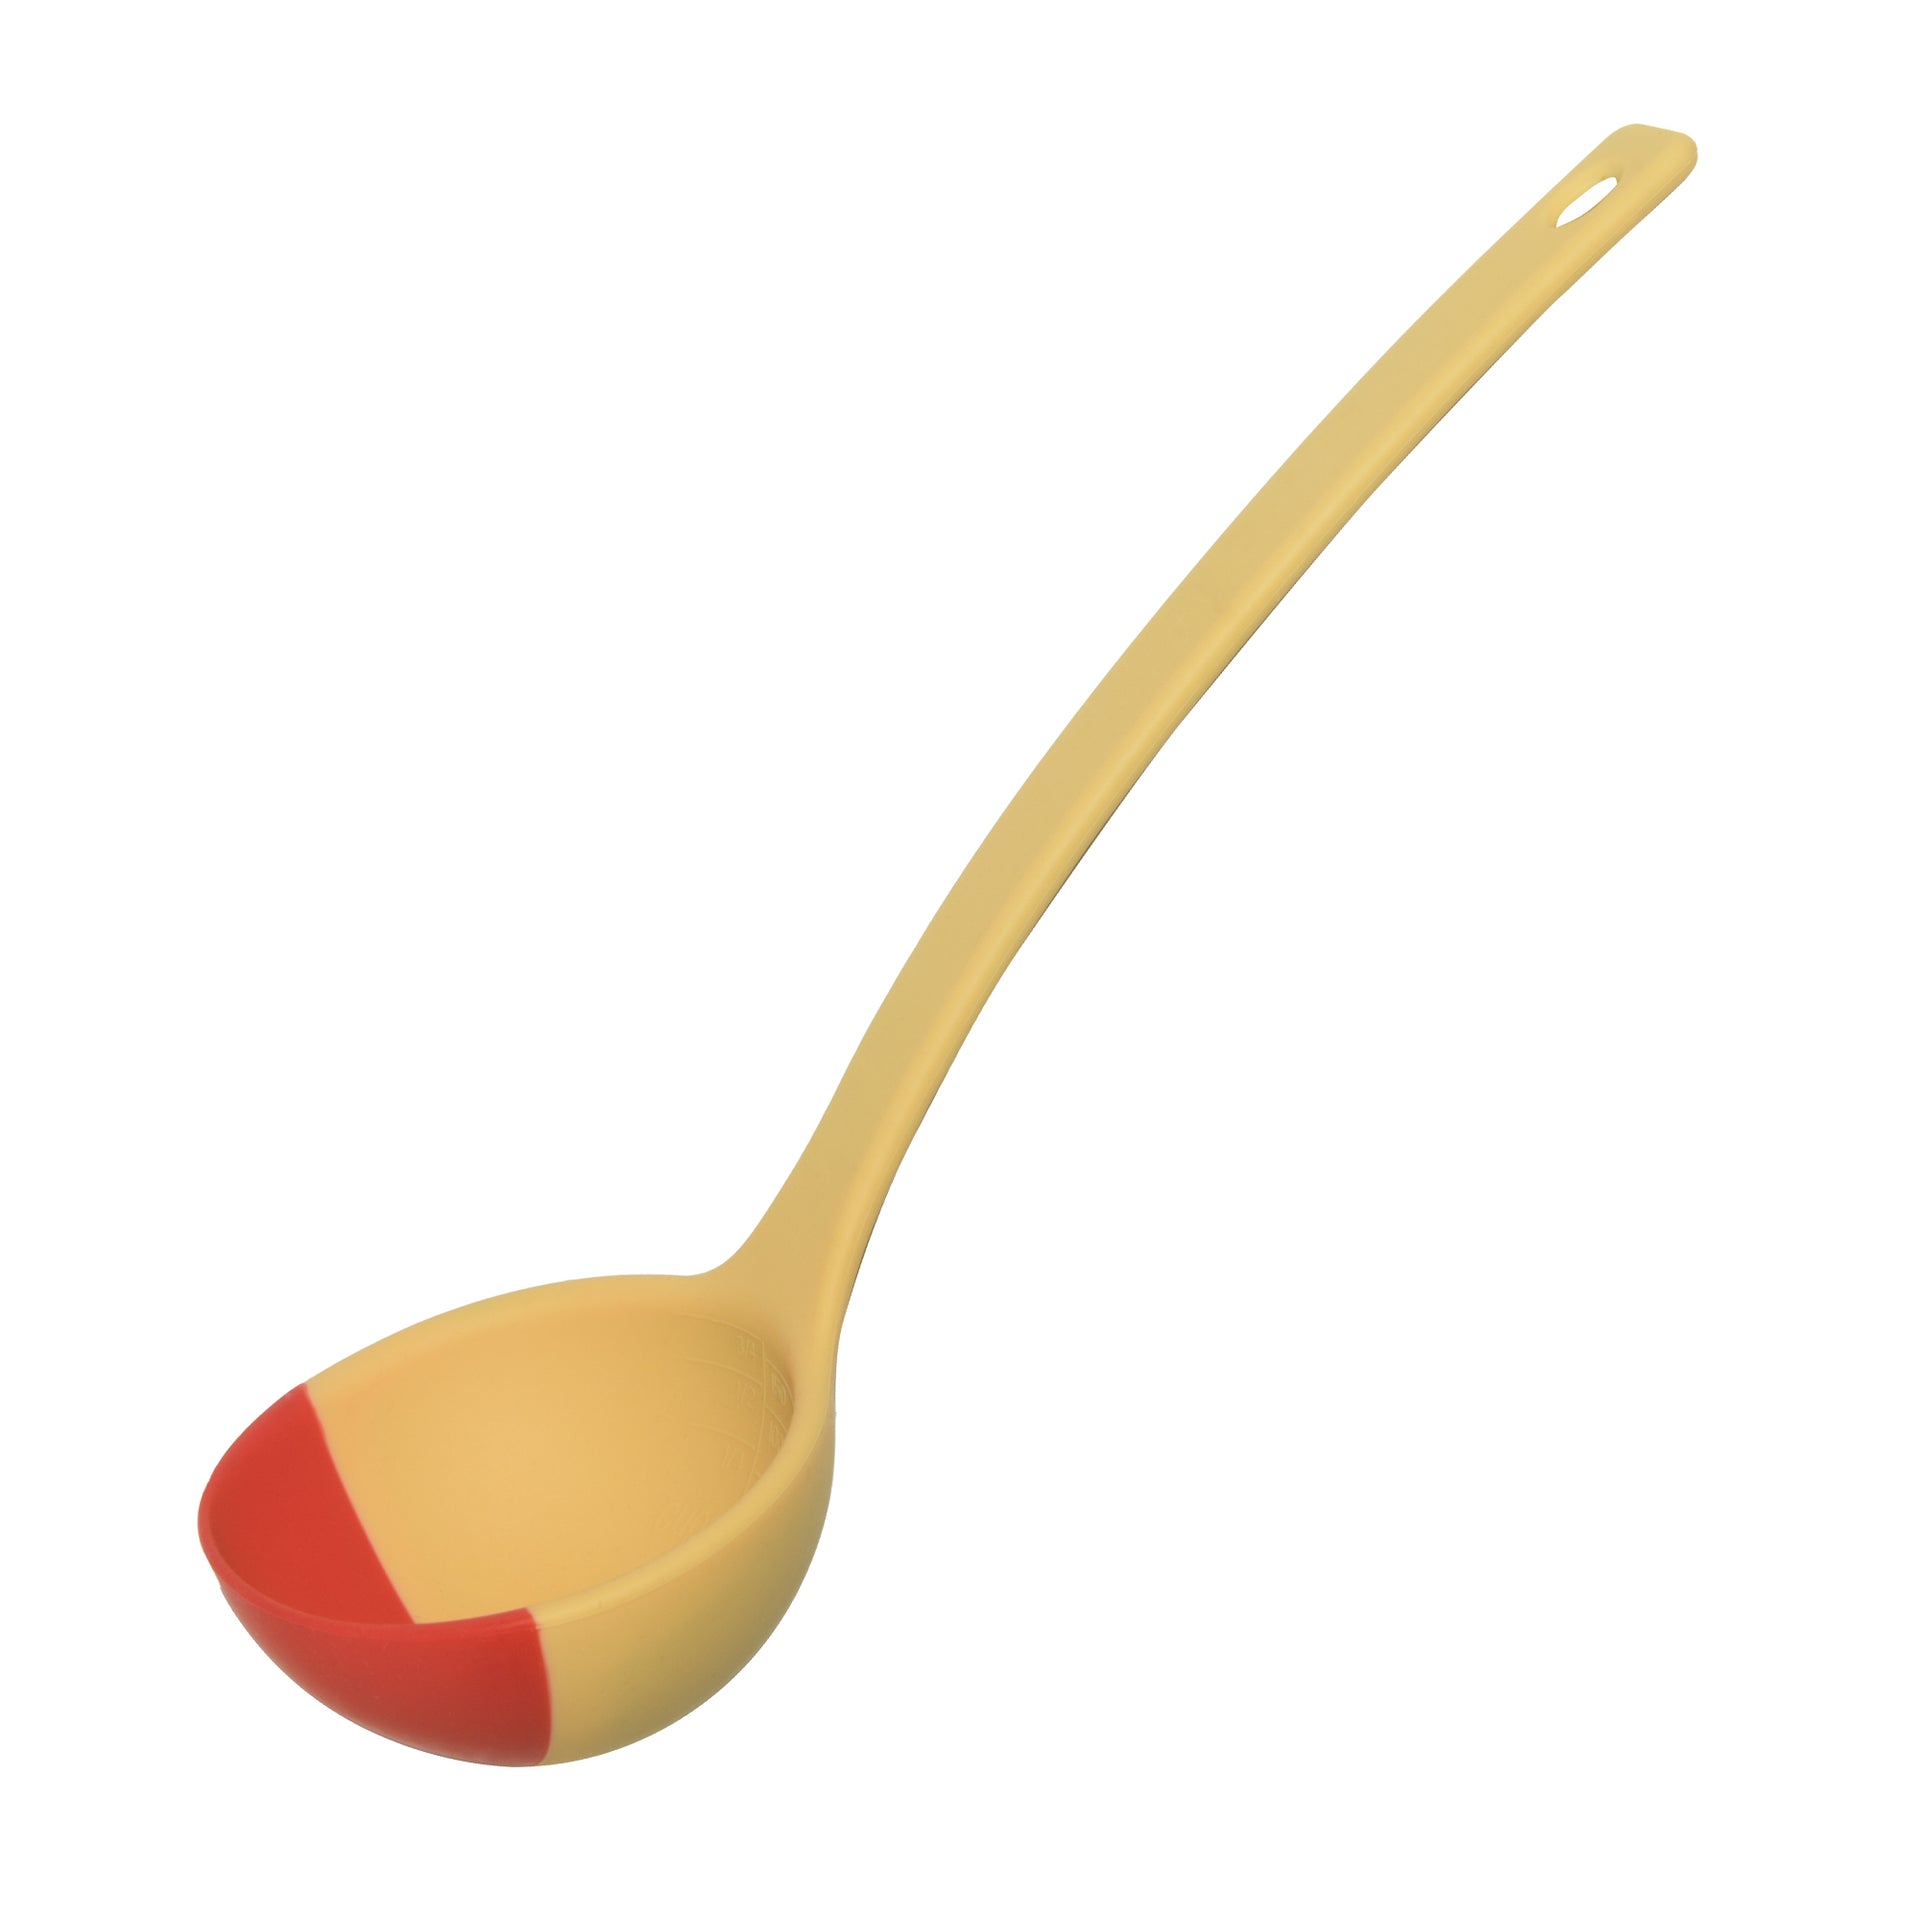 Soft Top Ladle Spoon SCOUPS - Sunset at sea – Scoups Spoon